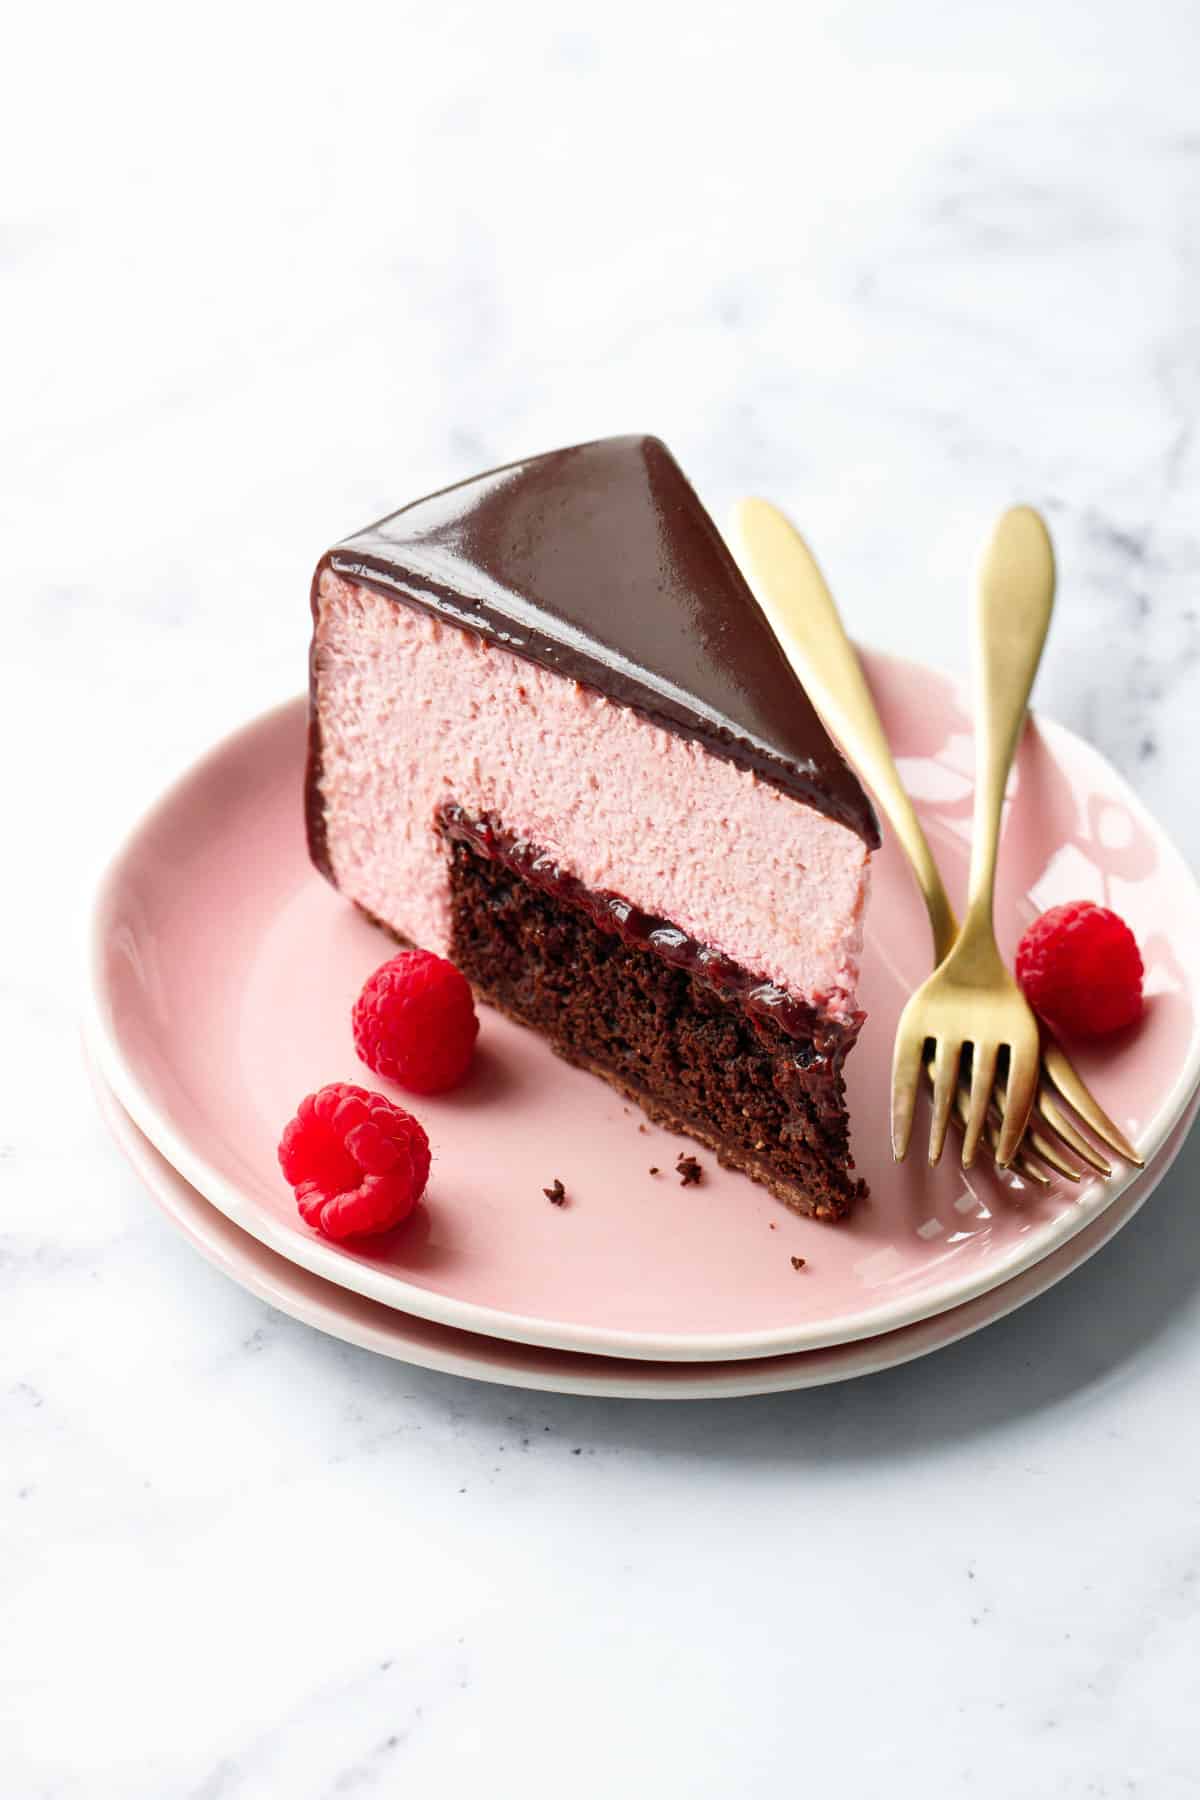 Slice of Chocolate Raspberry Mousse Cake with a super shiny chocolate glaze, on pink plates with raspberries and a gold fork.